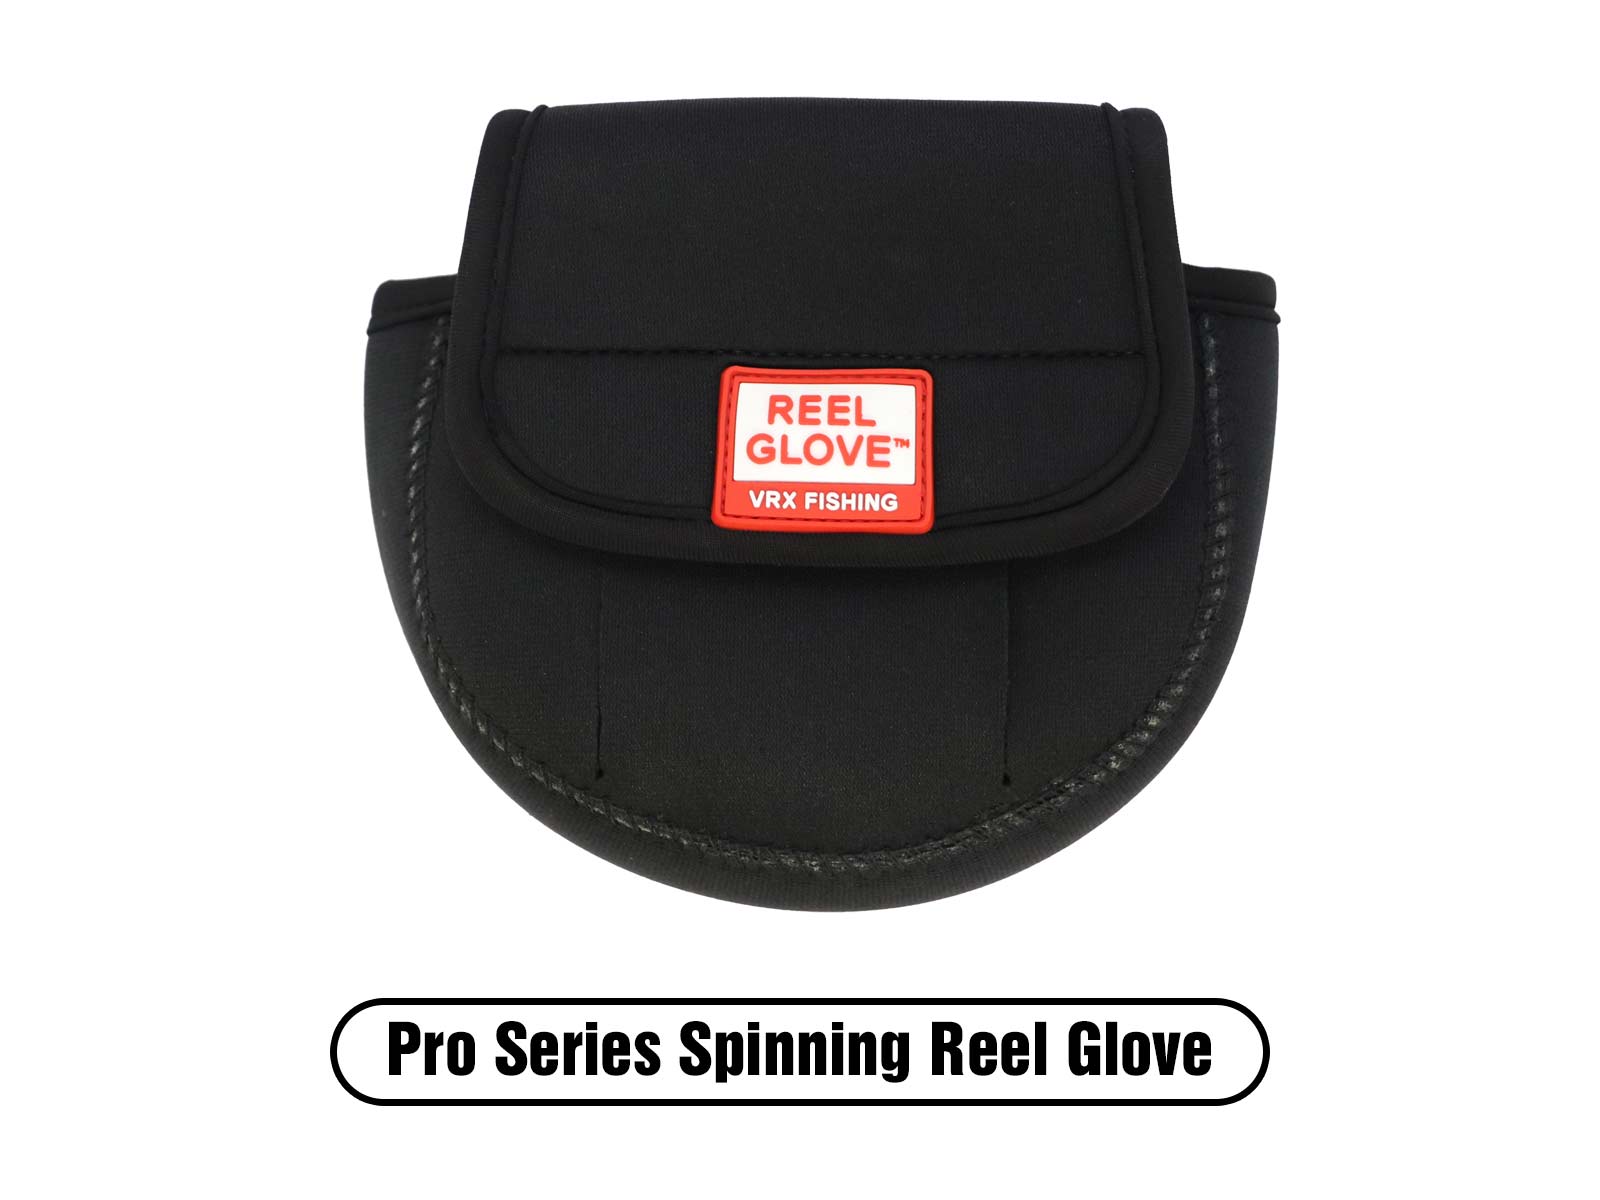 The Reel Glove - Spinning